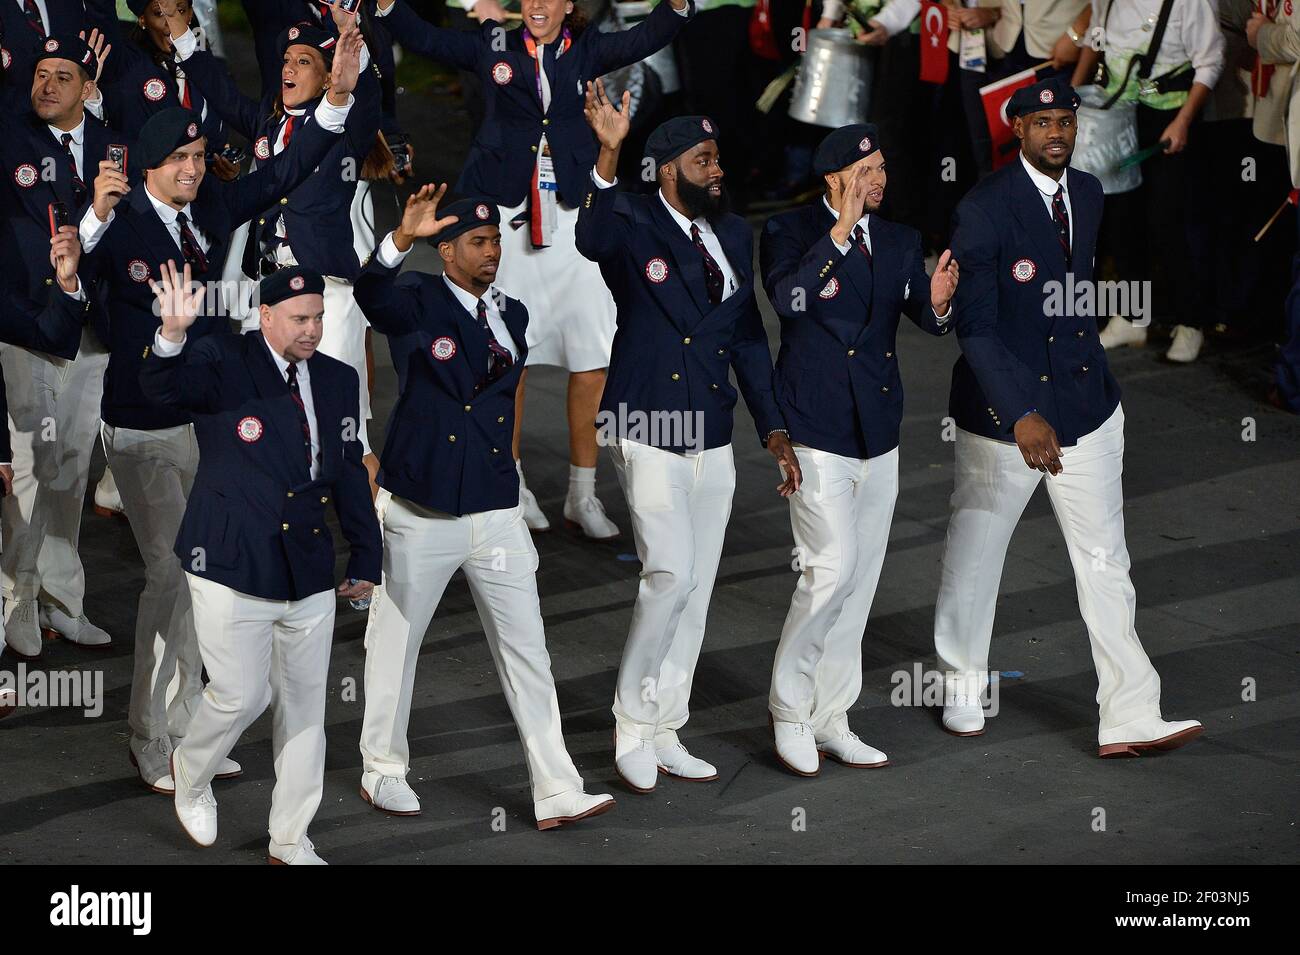 Members Of The Usa Men S Basketball Team March Into The Olympic Stadium During The Opening Ceremony For The London 12 Summer Olympic Games In London England Friday July 27 12 Photo By